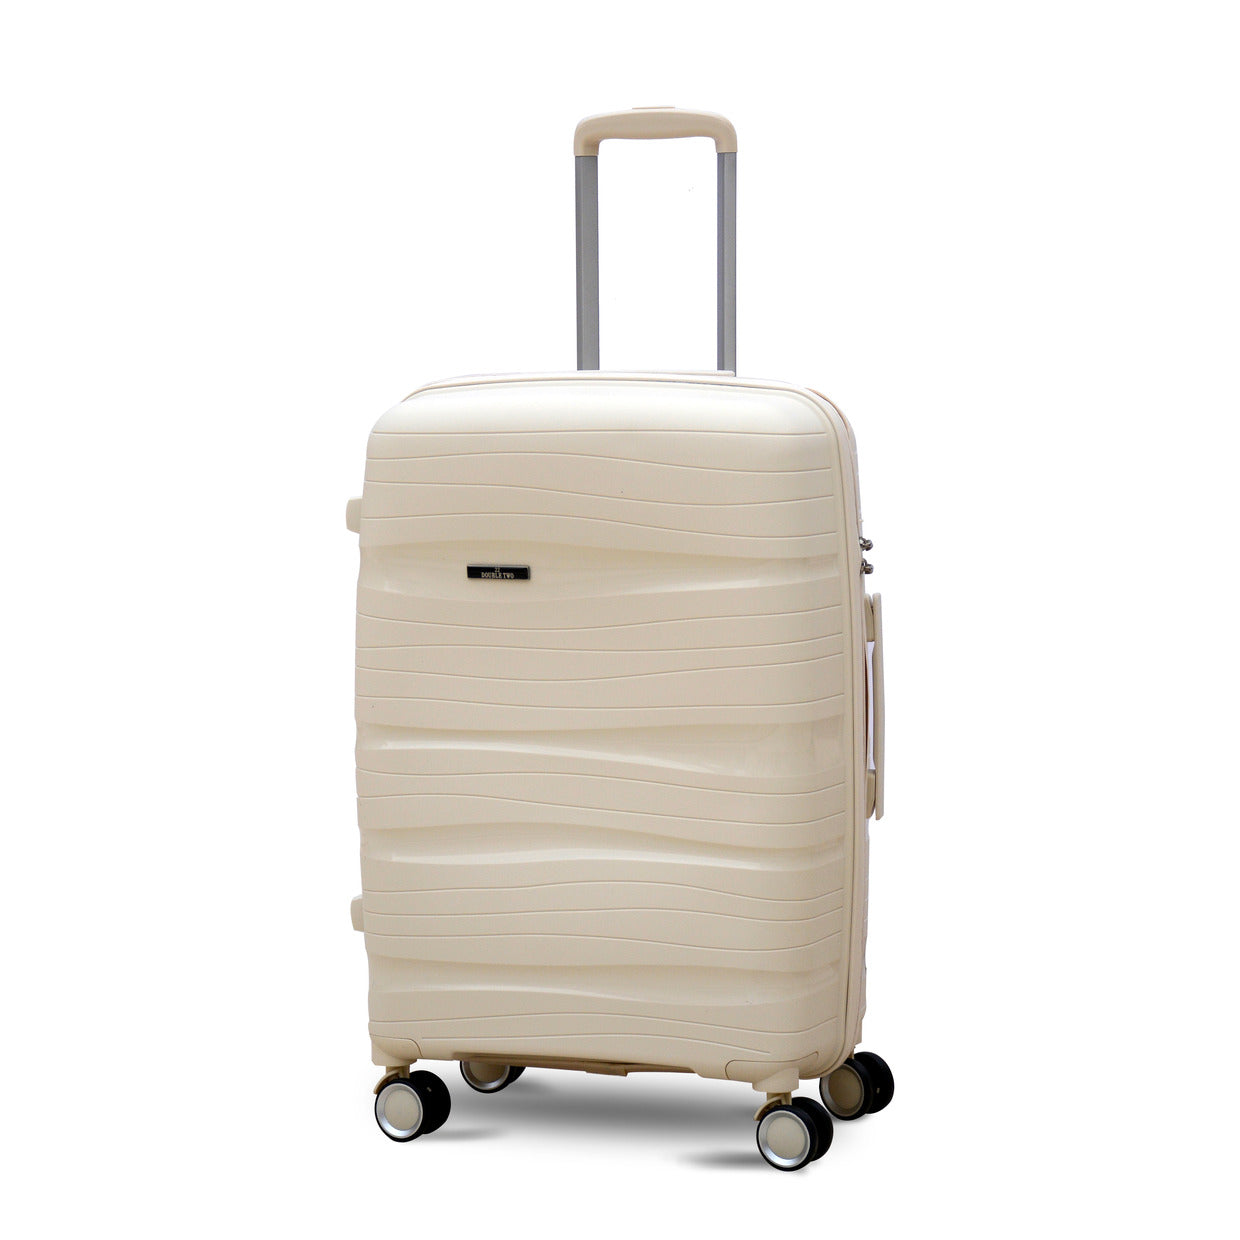 20" Beige Colour Royal PP Luggage Lightweight Hard Case Carry On Trolley Bag With Double Spinner Wheel